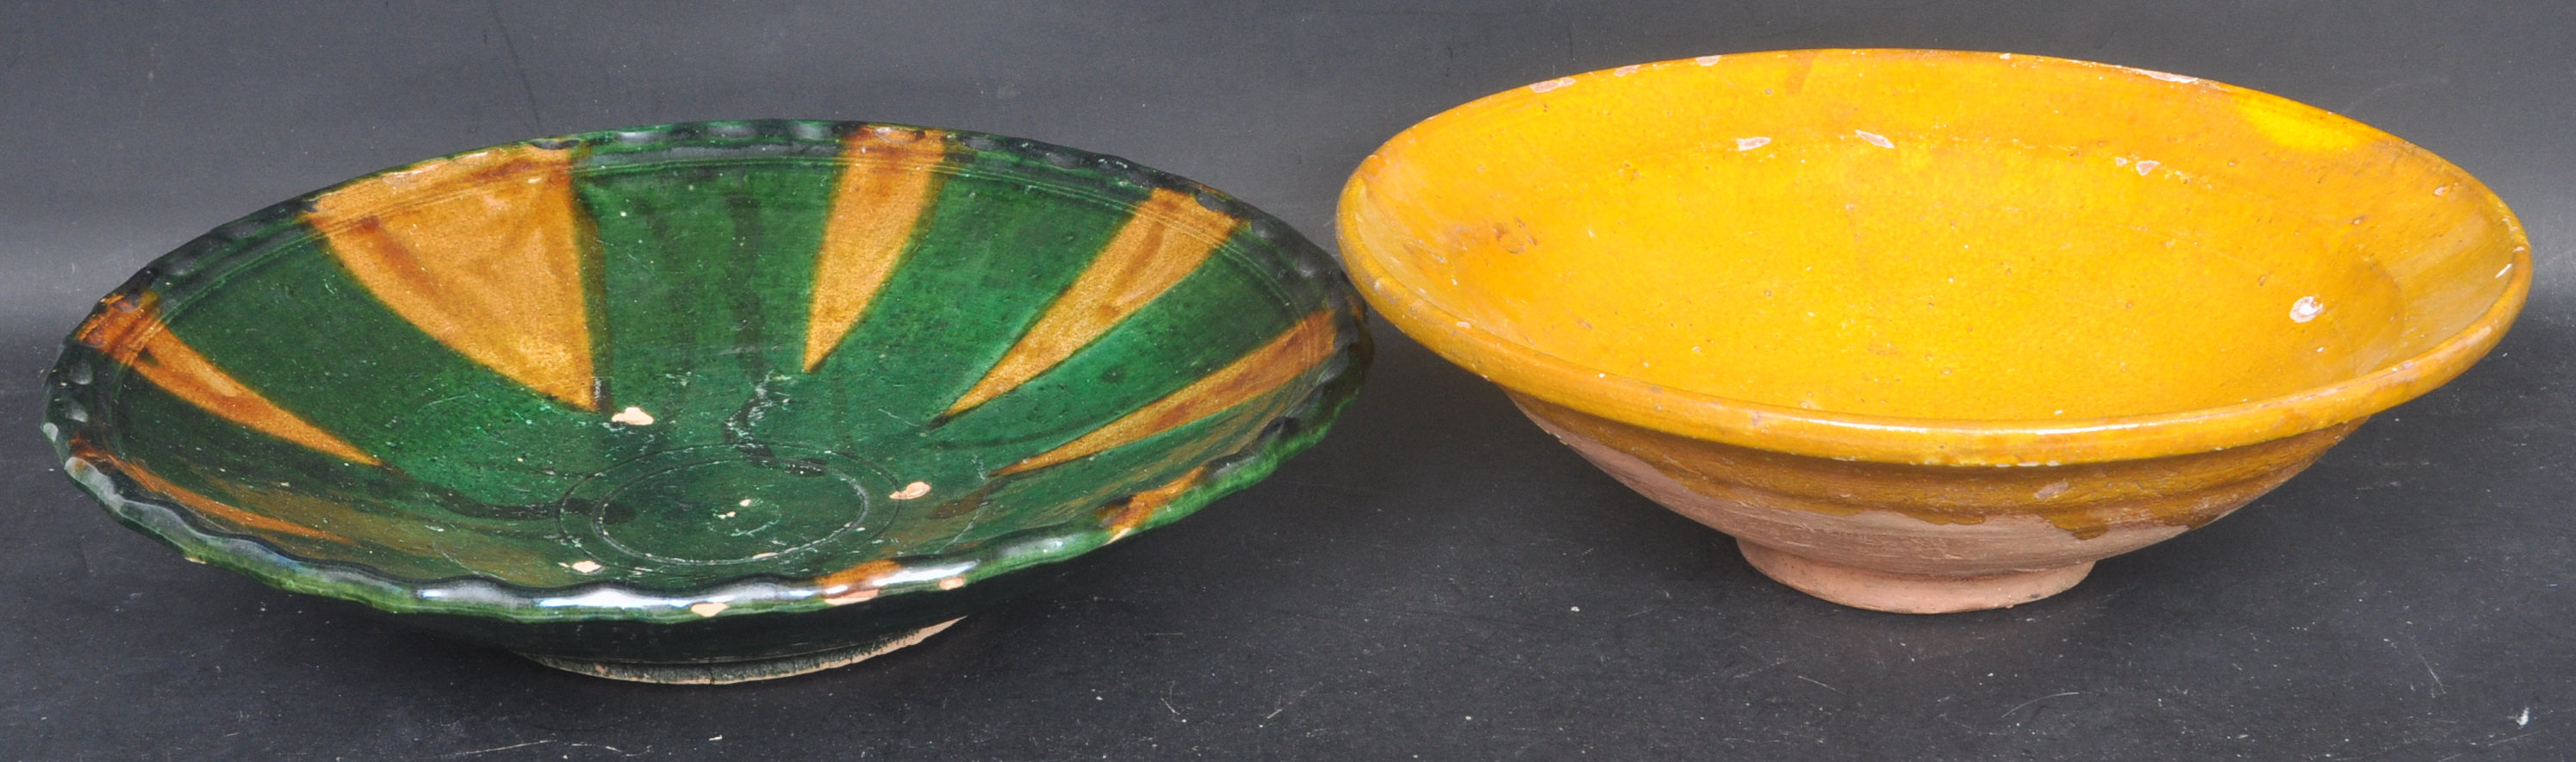 PAIR OF EARTHENWARE CENTREPEICE FRUIT BOWLS